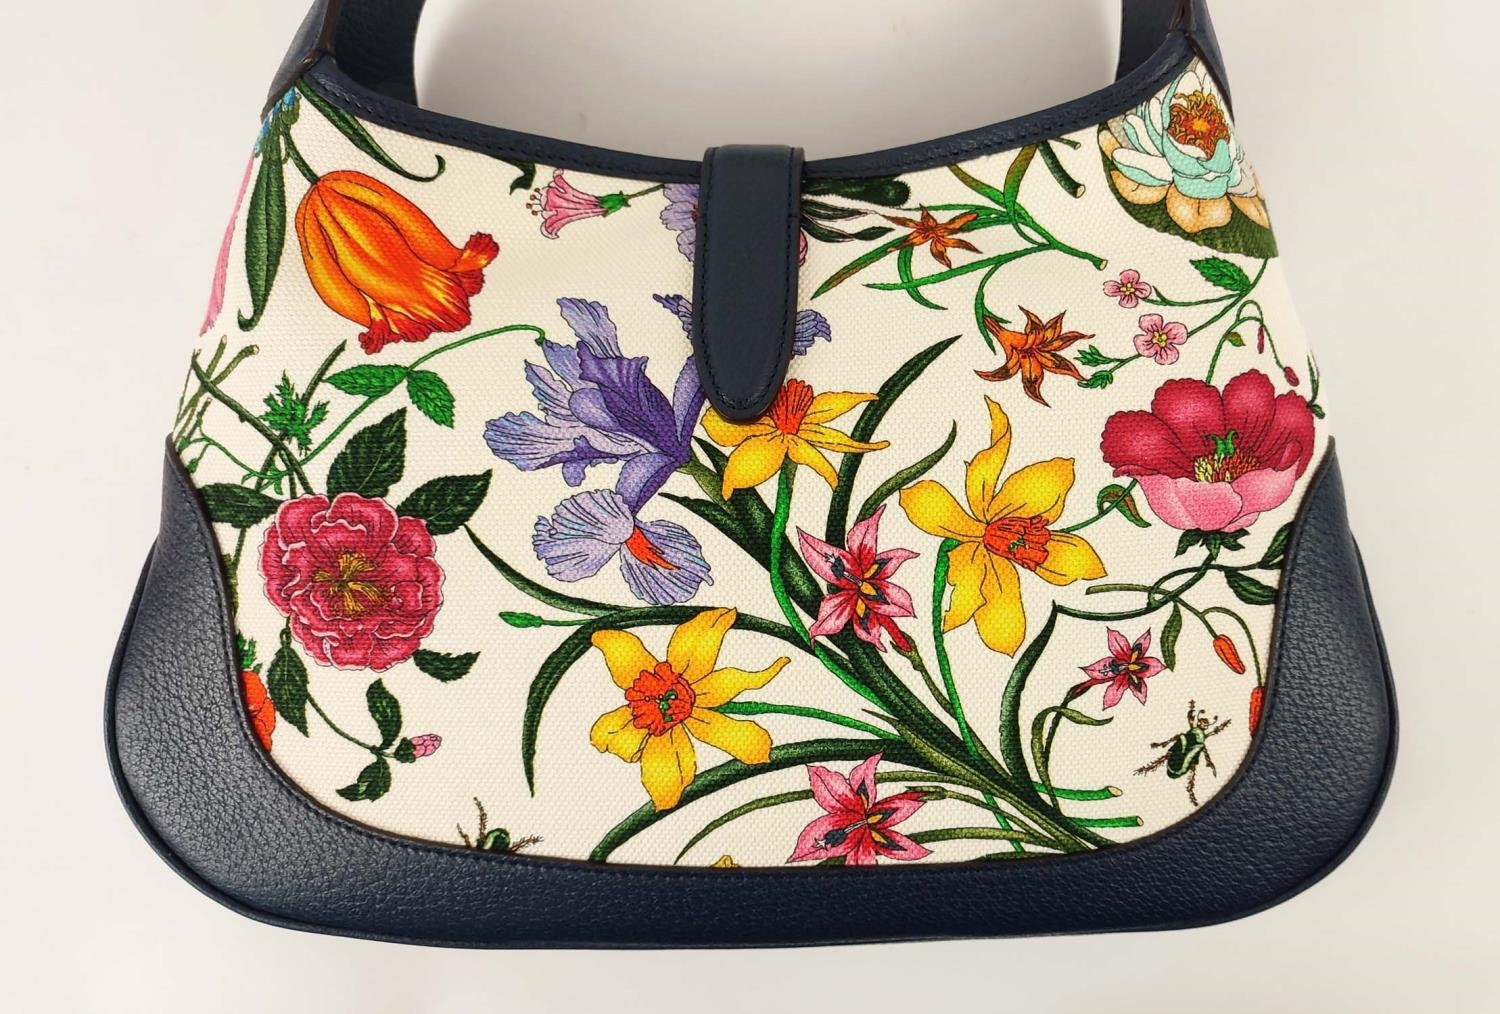 GUCCI JACKIE FLORA HOBO BAG, fabric floral pattern by Vittorio Accornero and navy blue leather - Image 5 of 8